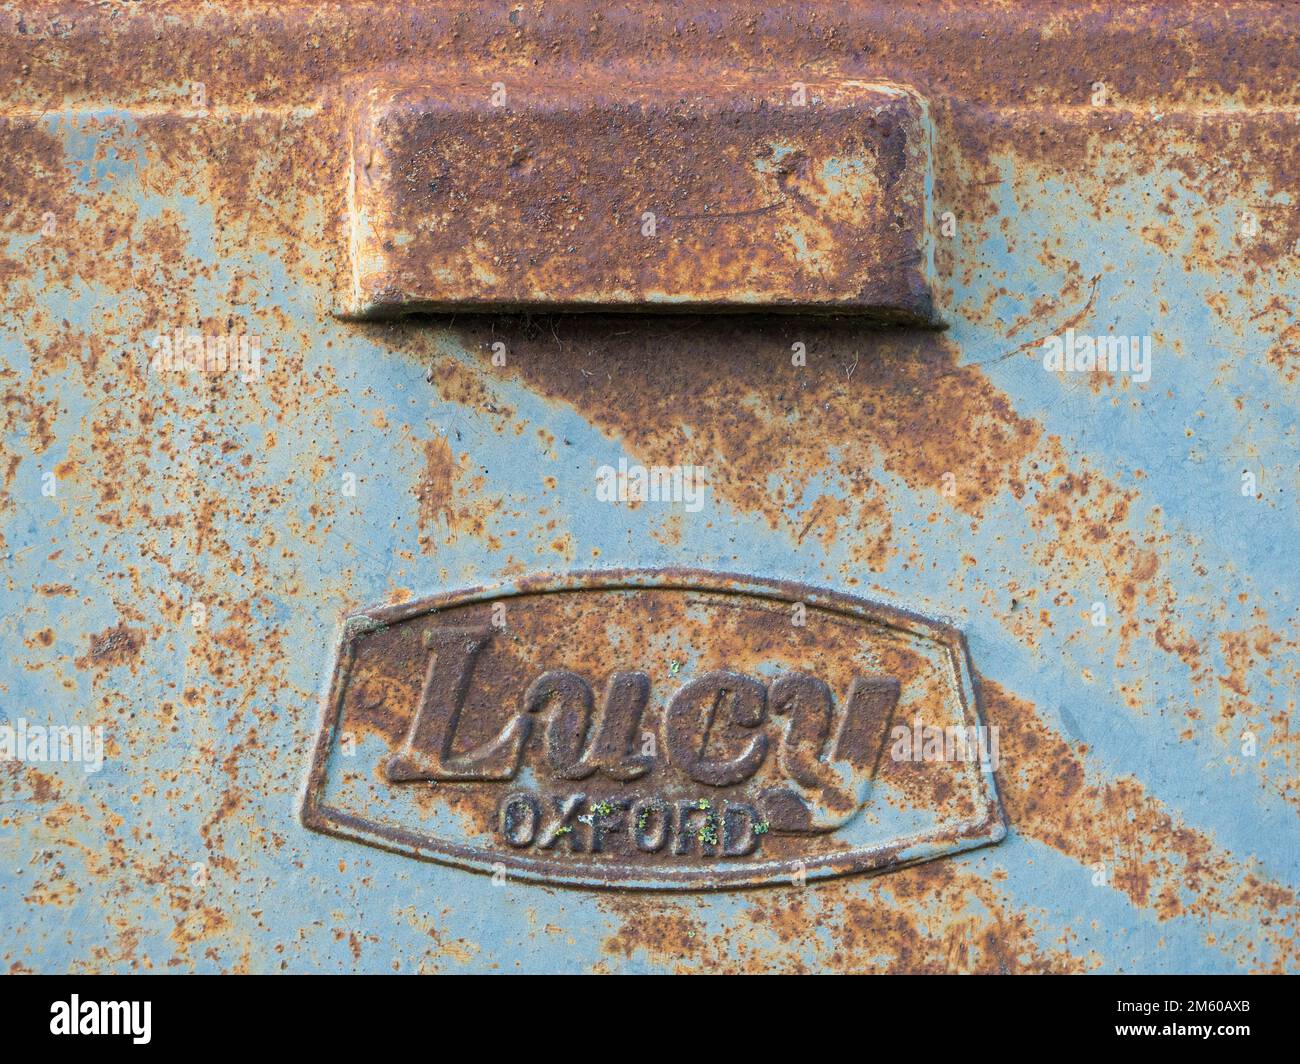 Aged, disused transformer box from Lucy of Oxford in Westbury Leigh, Wiltshire, England, UK. Stock Photo